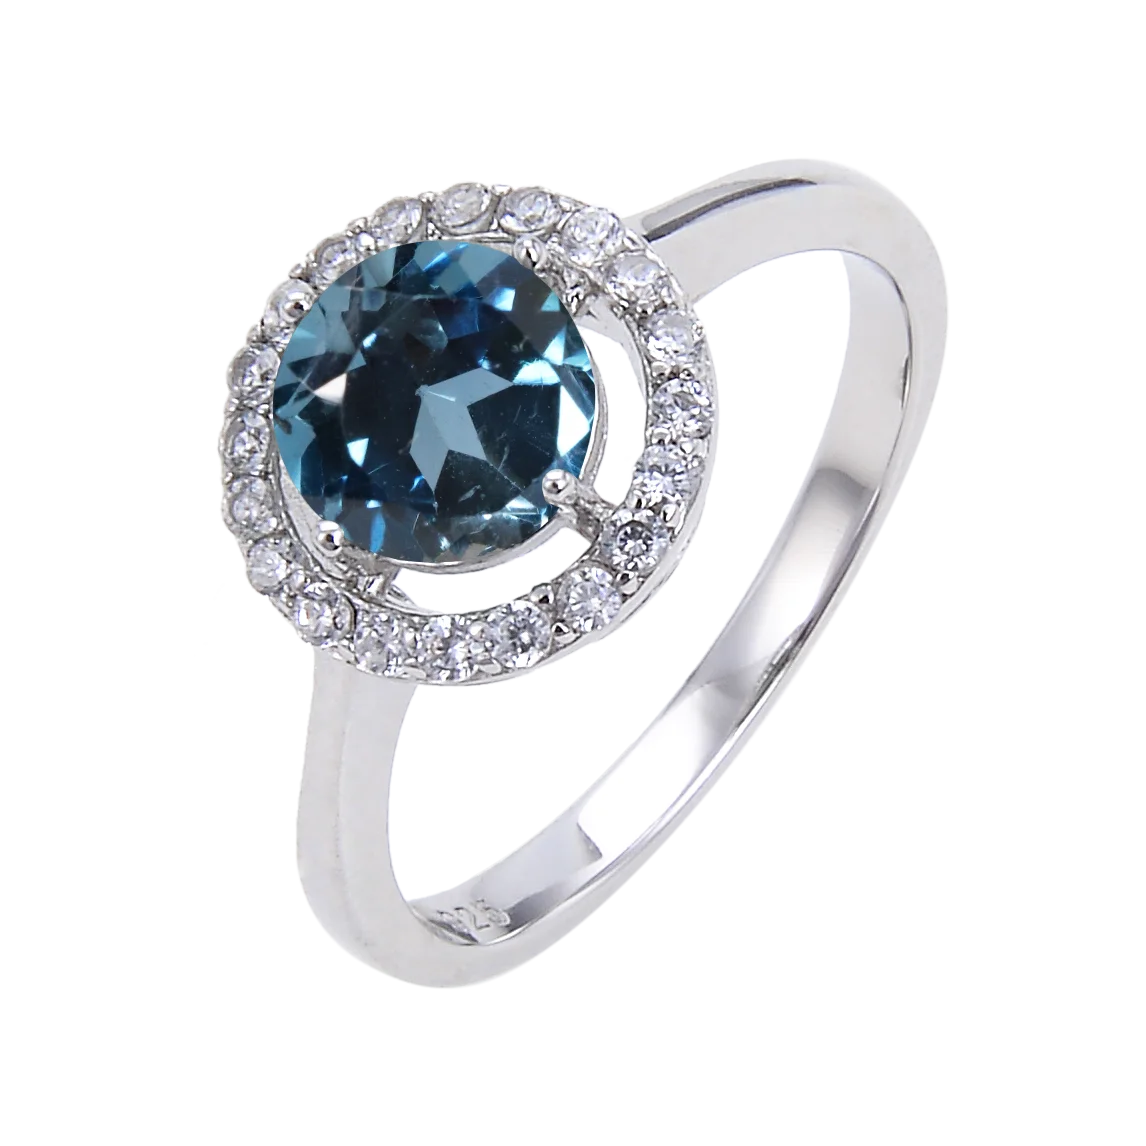 

Abiding Halo Engagement Rings 10mm Round Natural London Blue Topaz 925 Sterling Silver Ring With Customize Gemstone Service